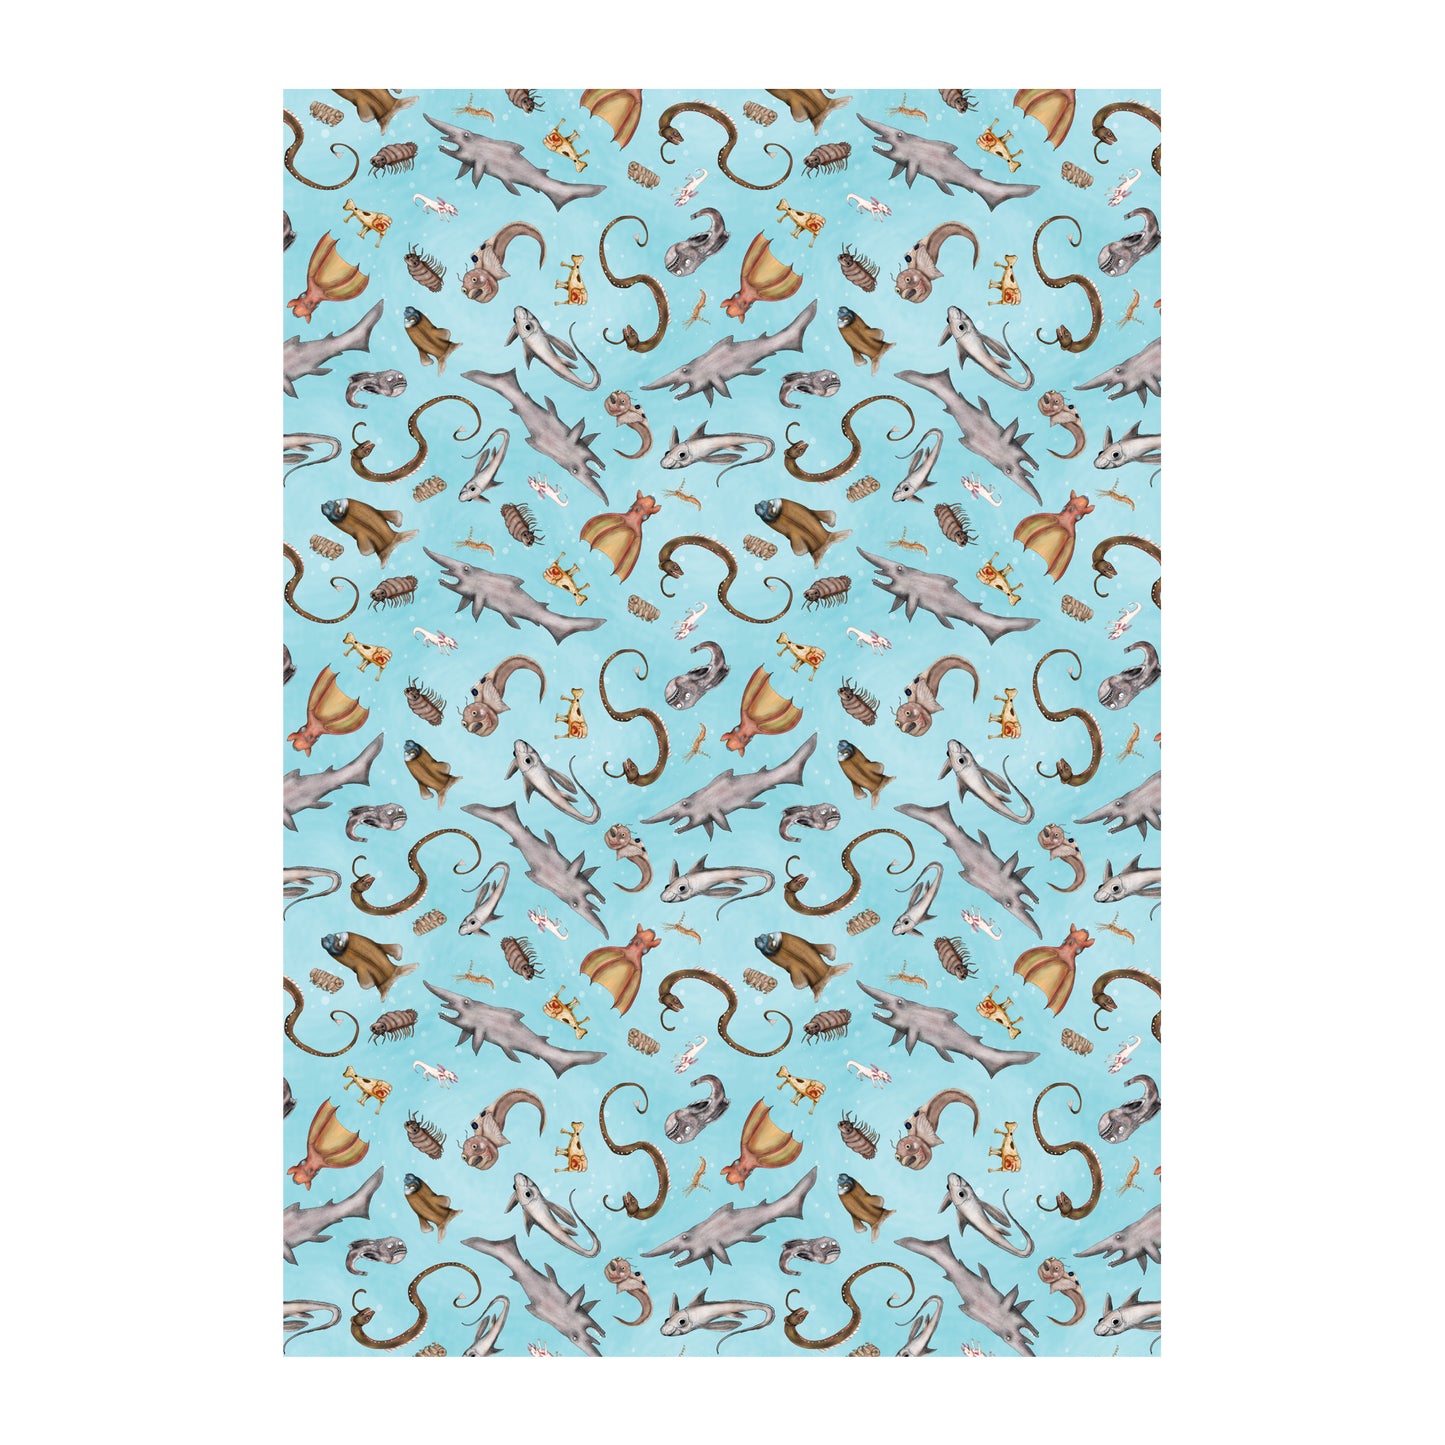 Weird Sea Creatures Wrapping Paper - Set of Three Sheets